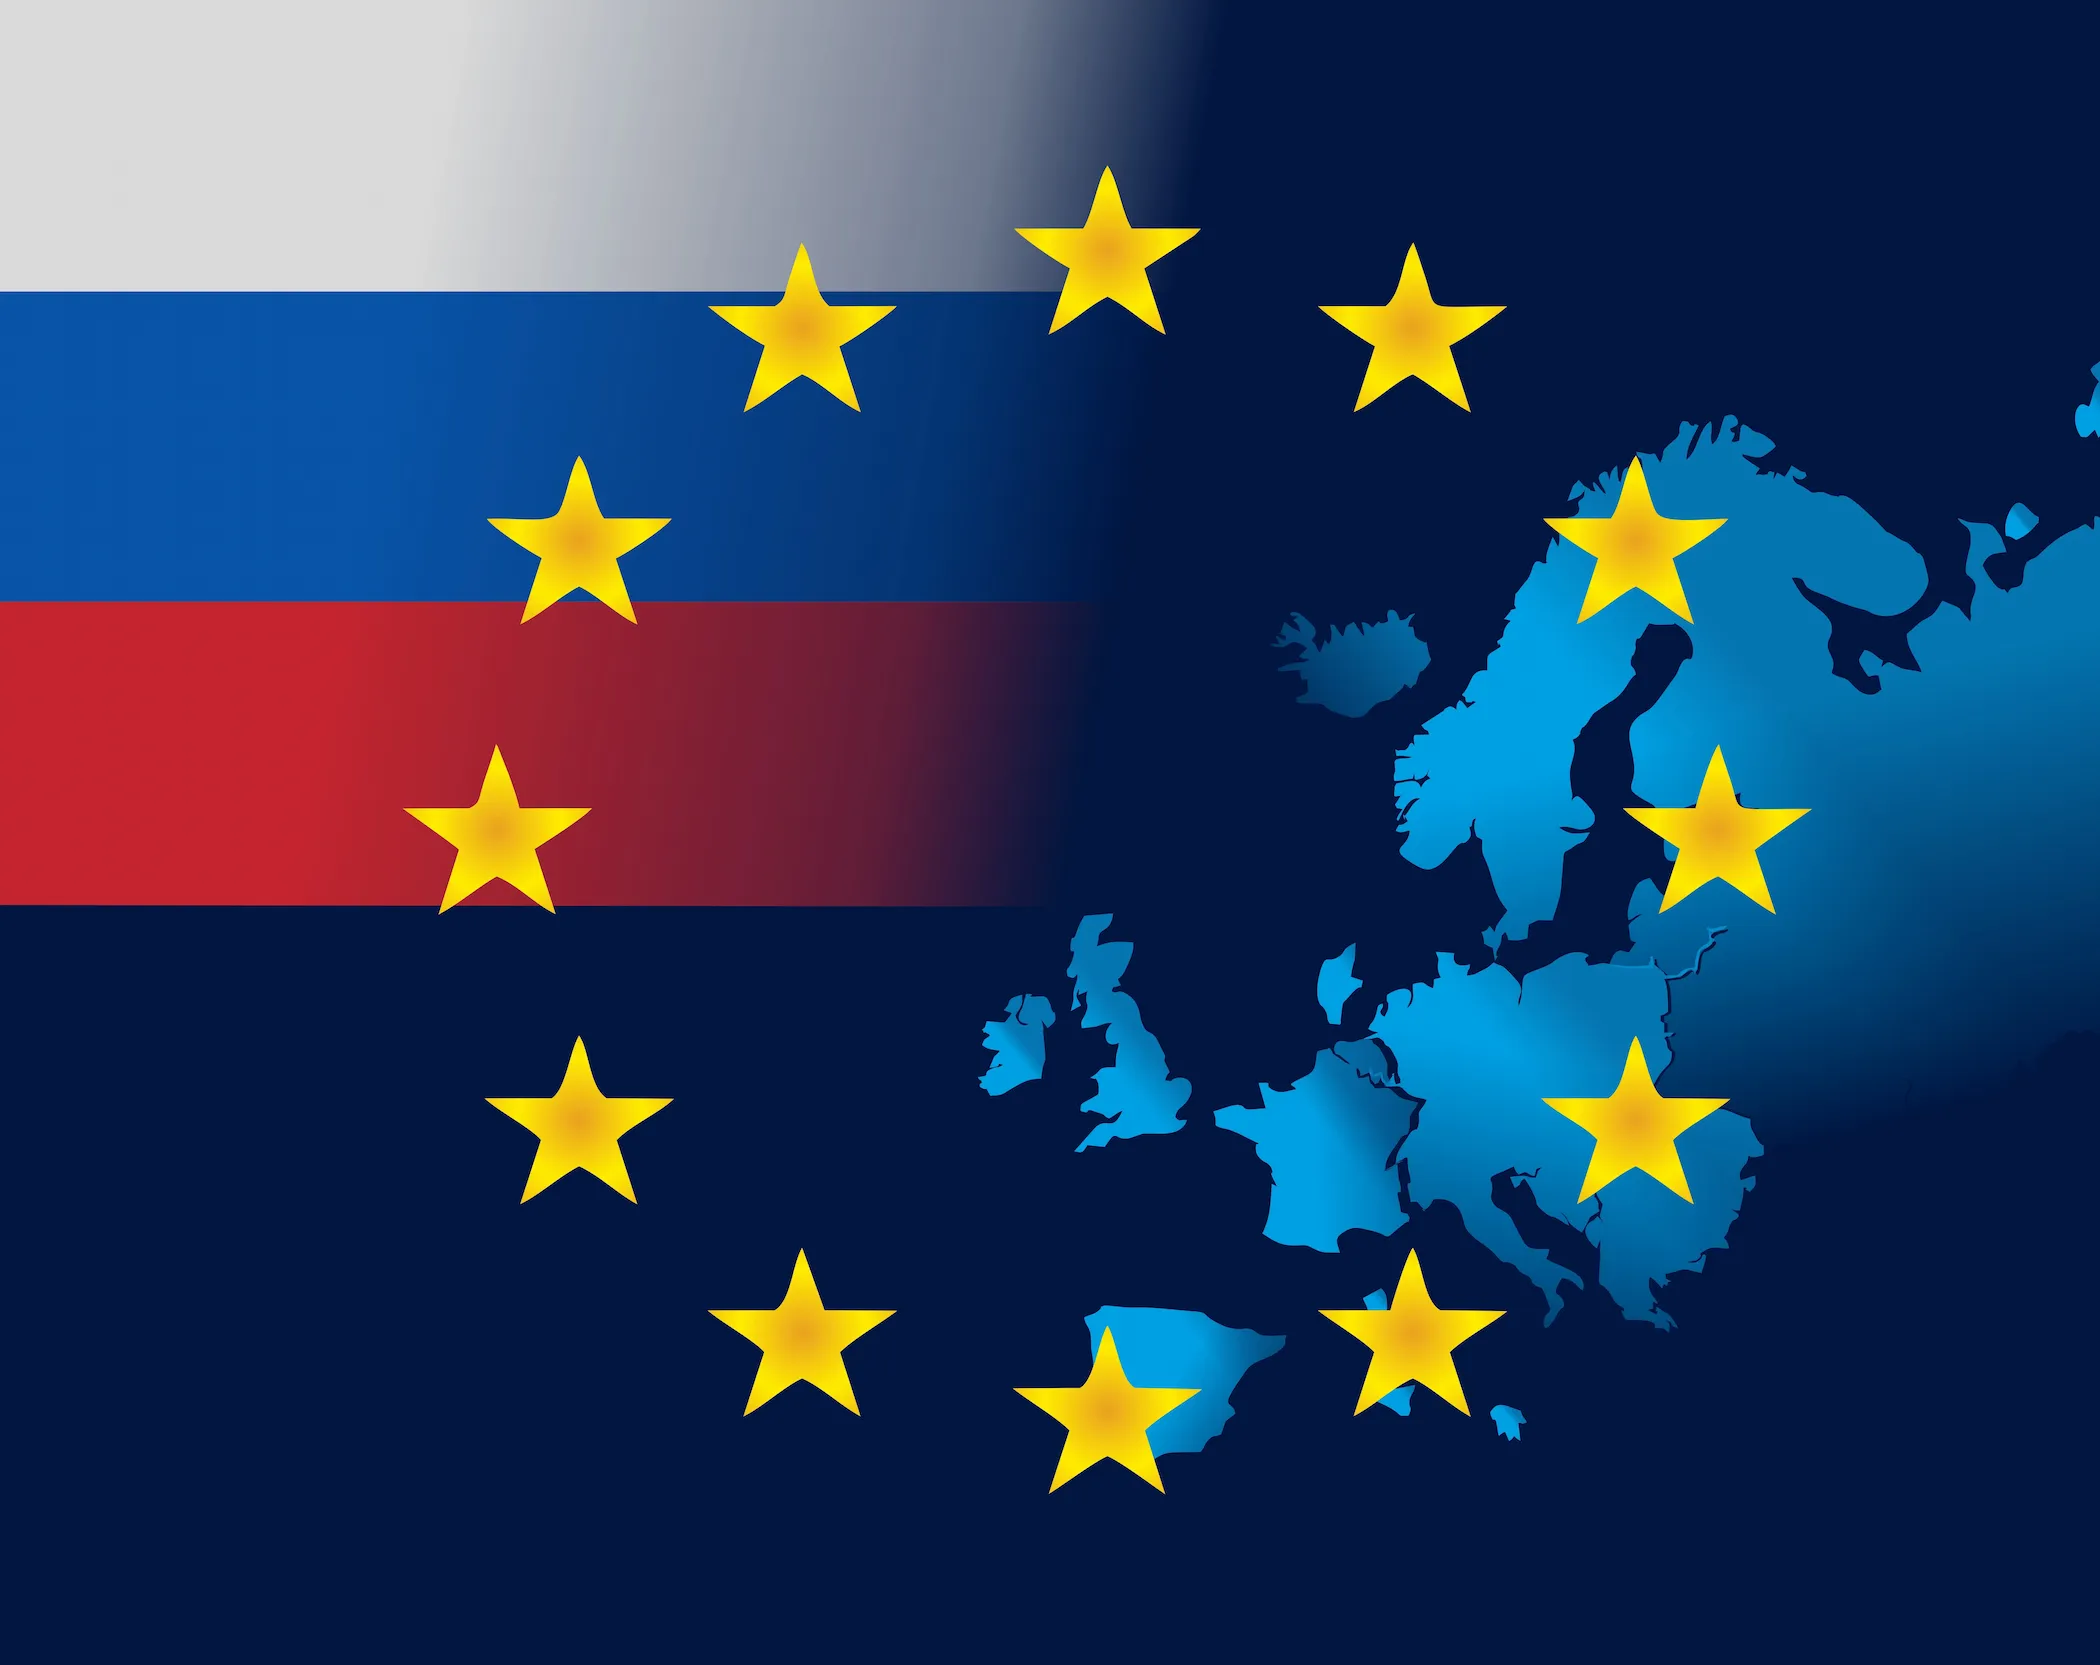 Has Moscow’s Control Over Europe Become Uncontrollable?